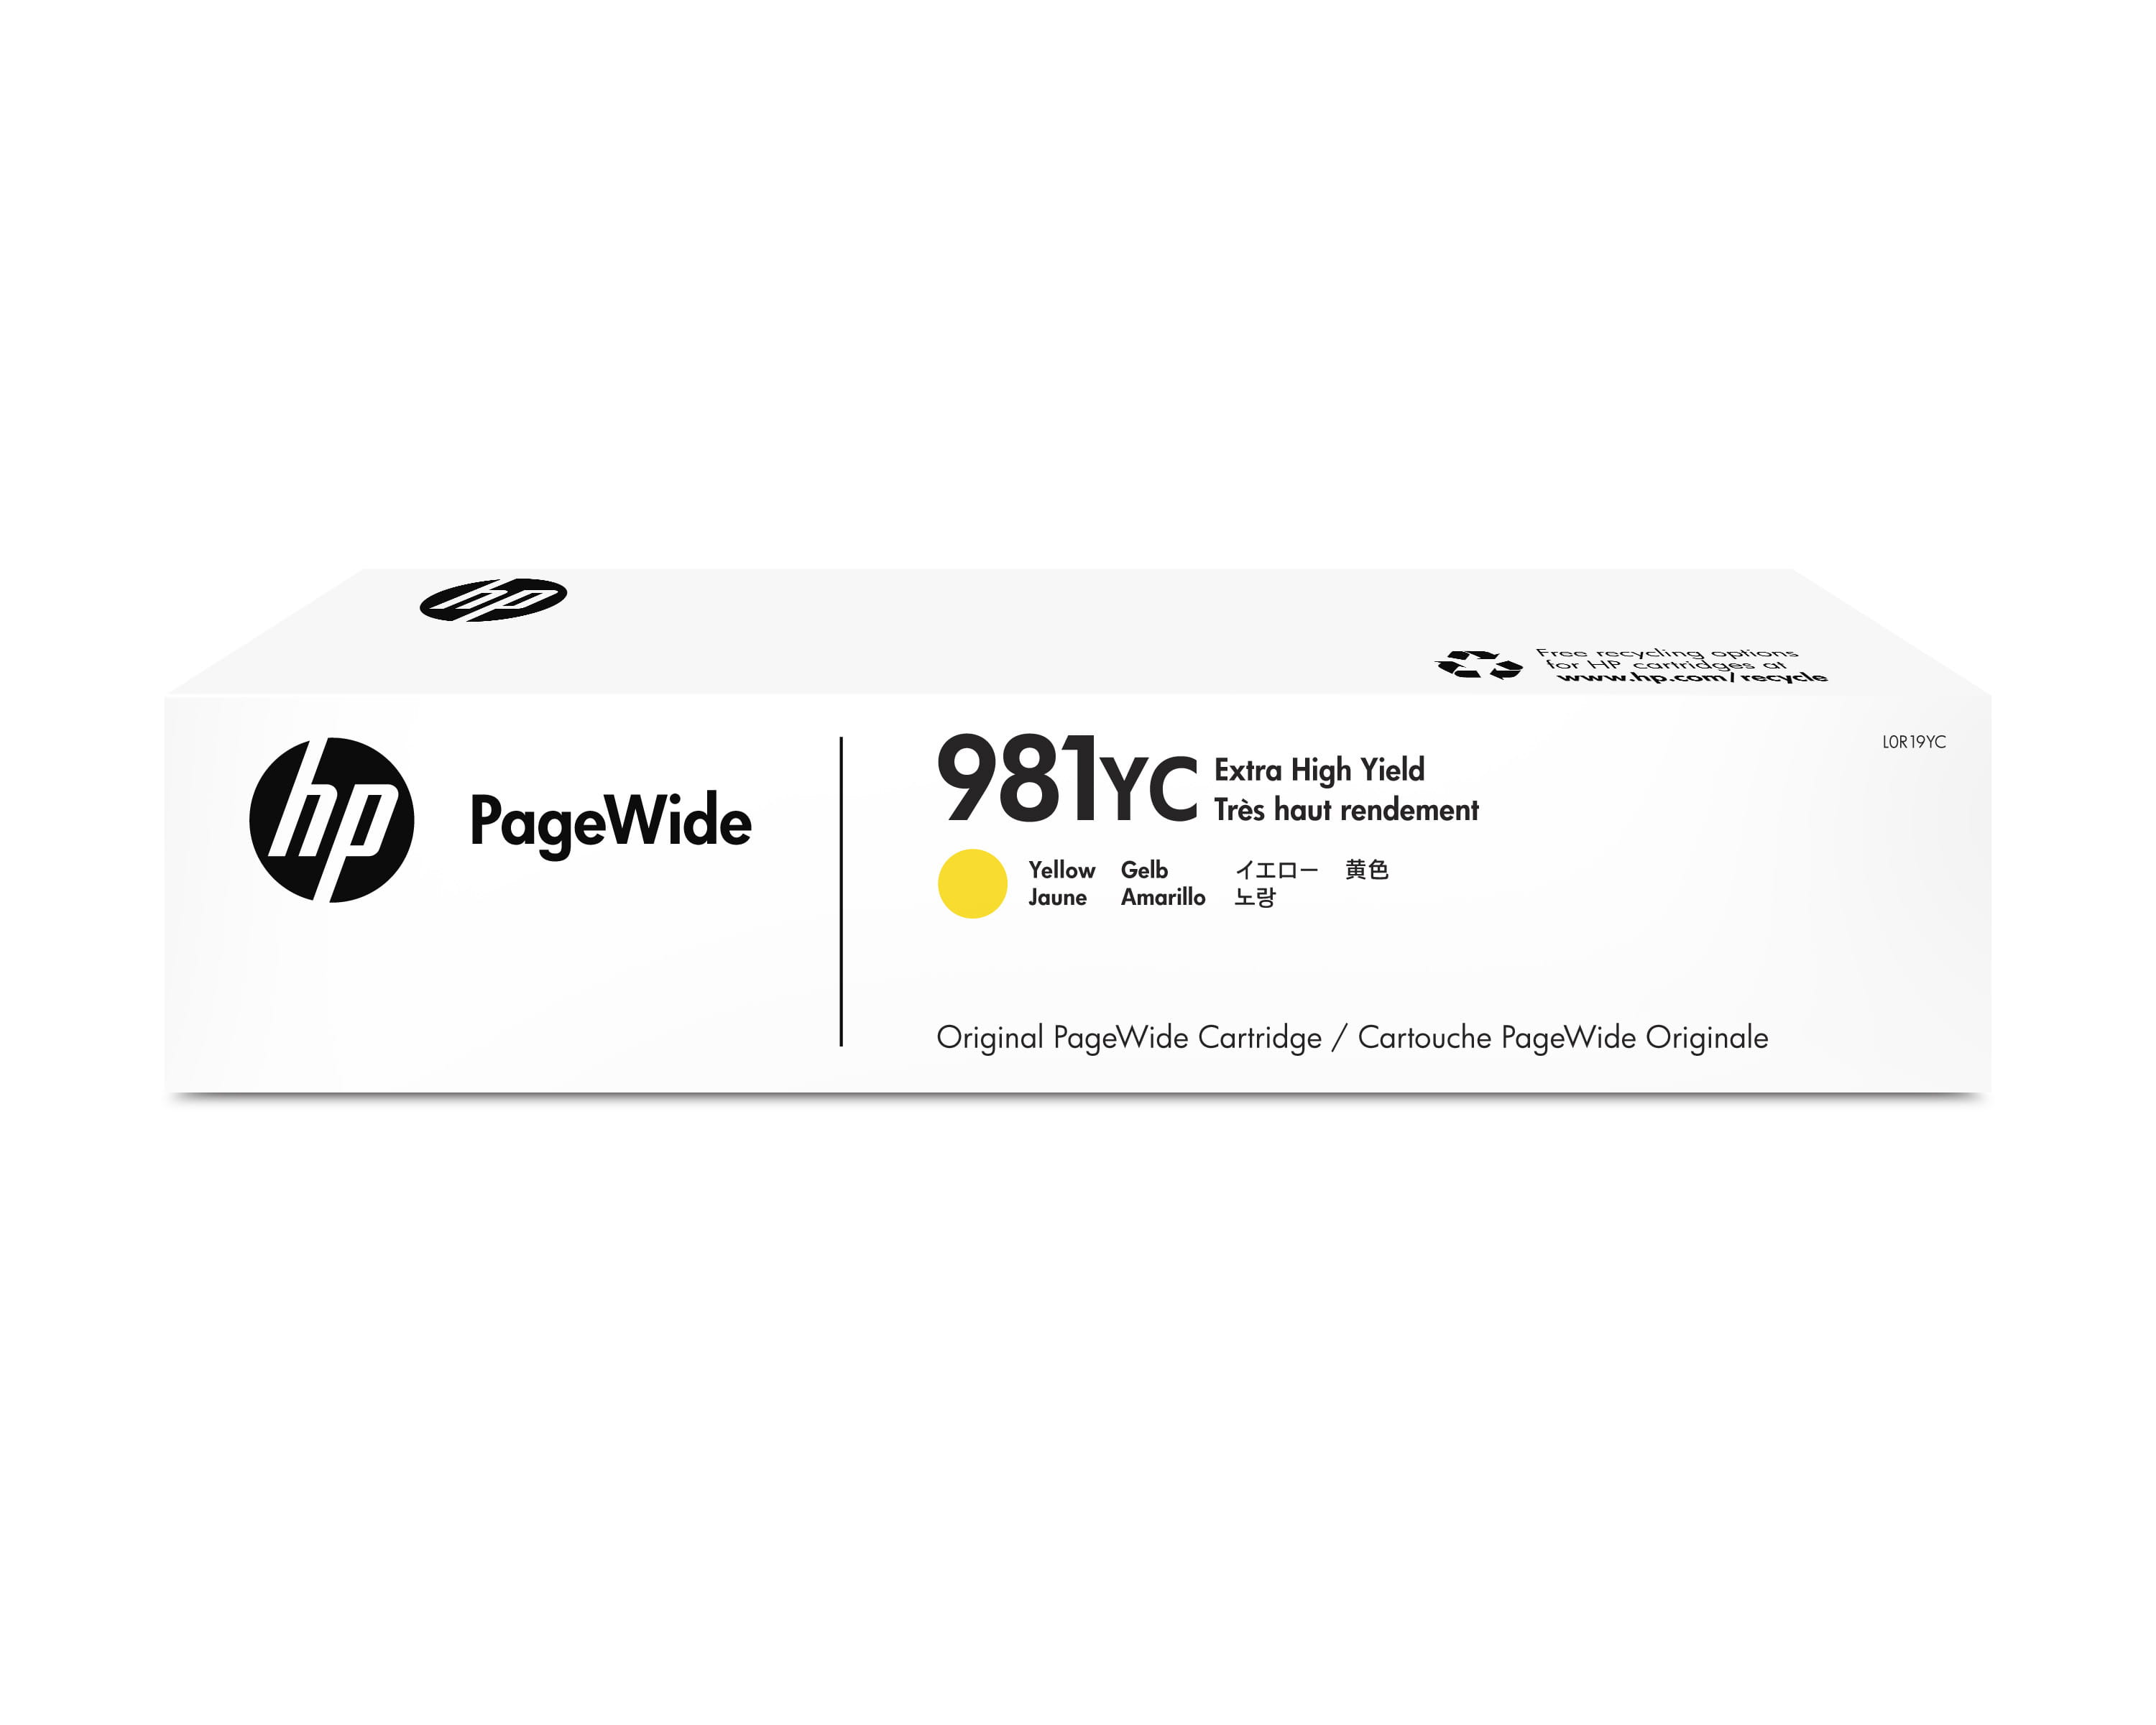 HP 981YC Yellow Contract PageWide Crtg, Original, Tinte auf Pigmentbasis, Gelb, HP, HP PageWide Enterprise Color 556/586, Tintenstrahldrucker